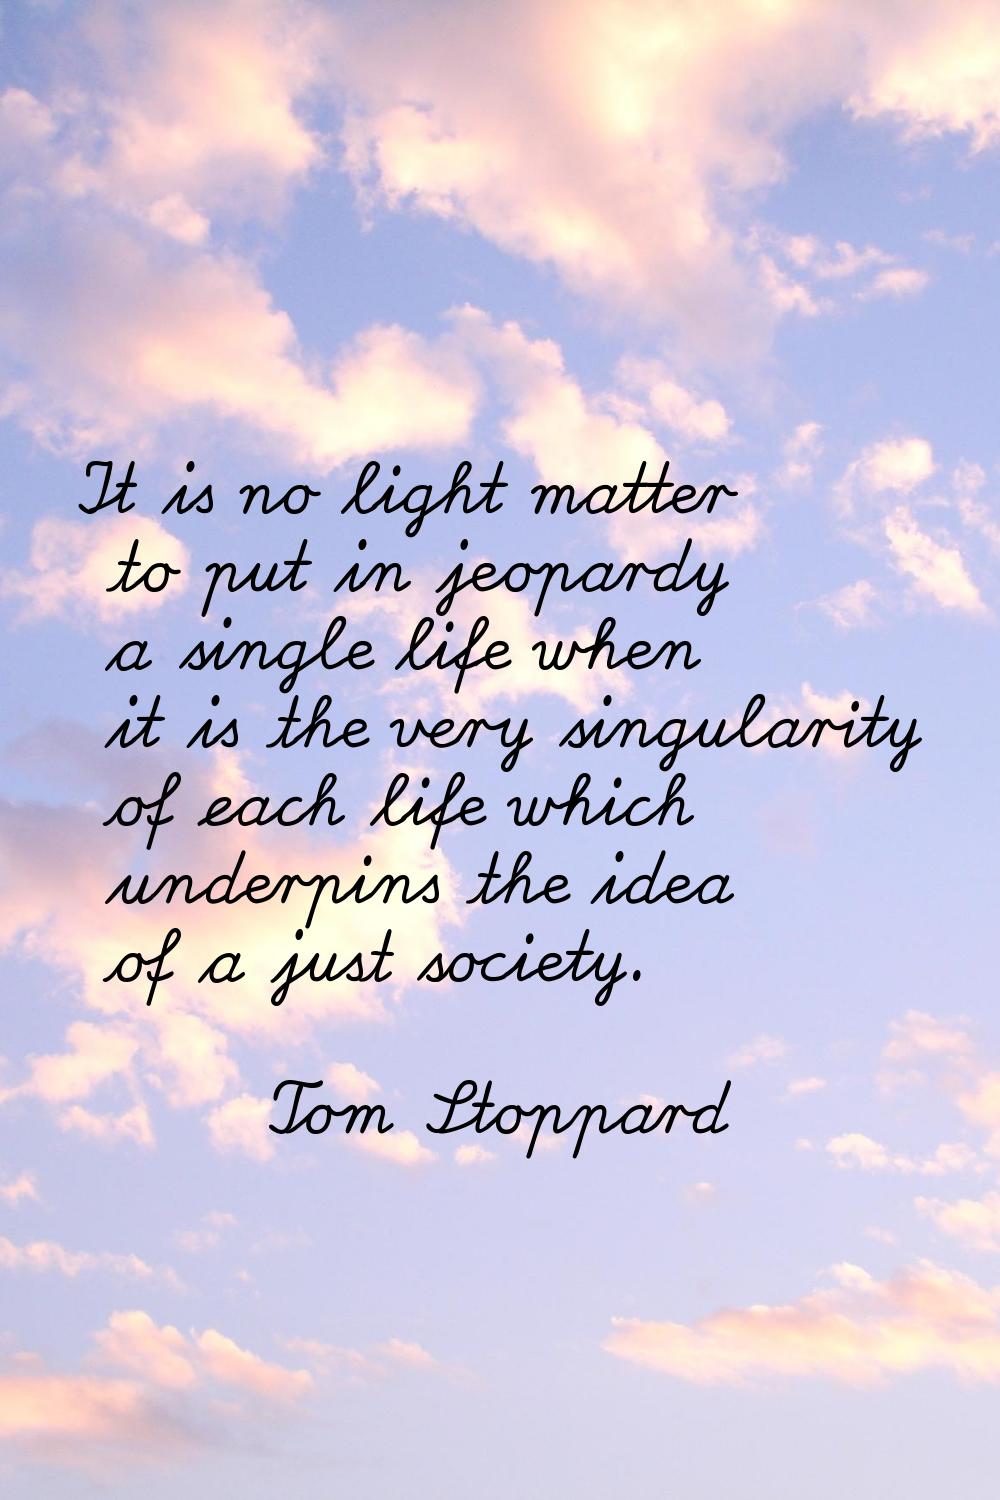 It is no light matter to put in jeopardy a single life when it is the very singularity of each life